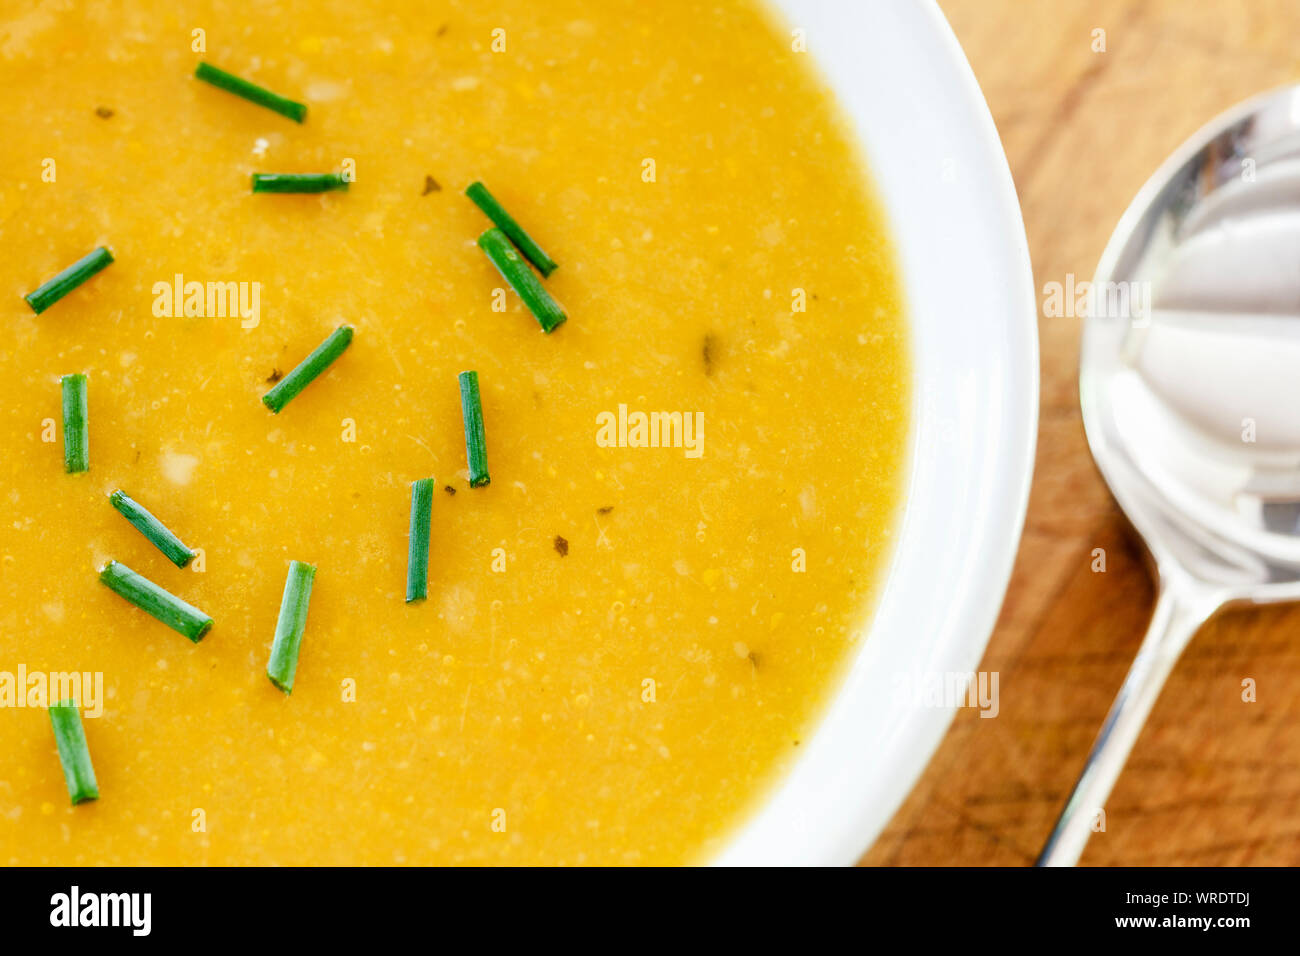 Bowl of fresh vegetable soup with chopped chives Stock Photo